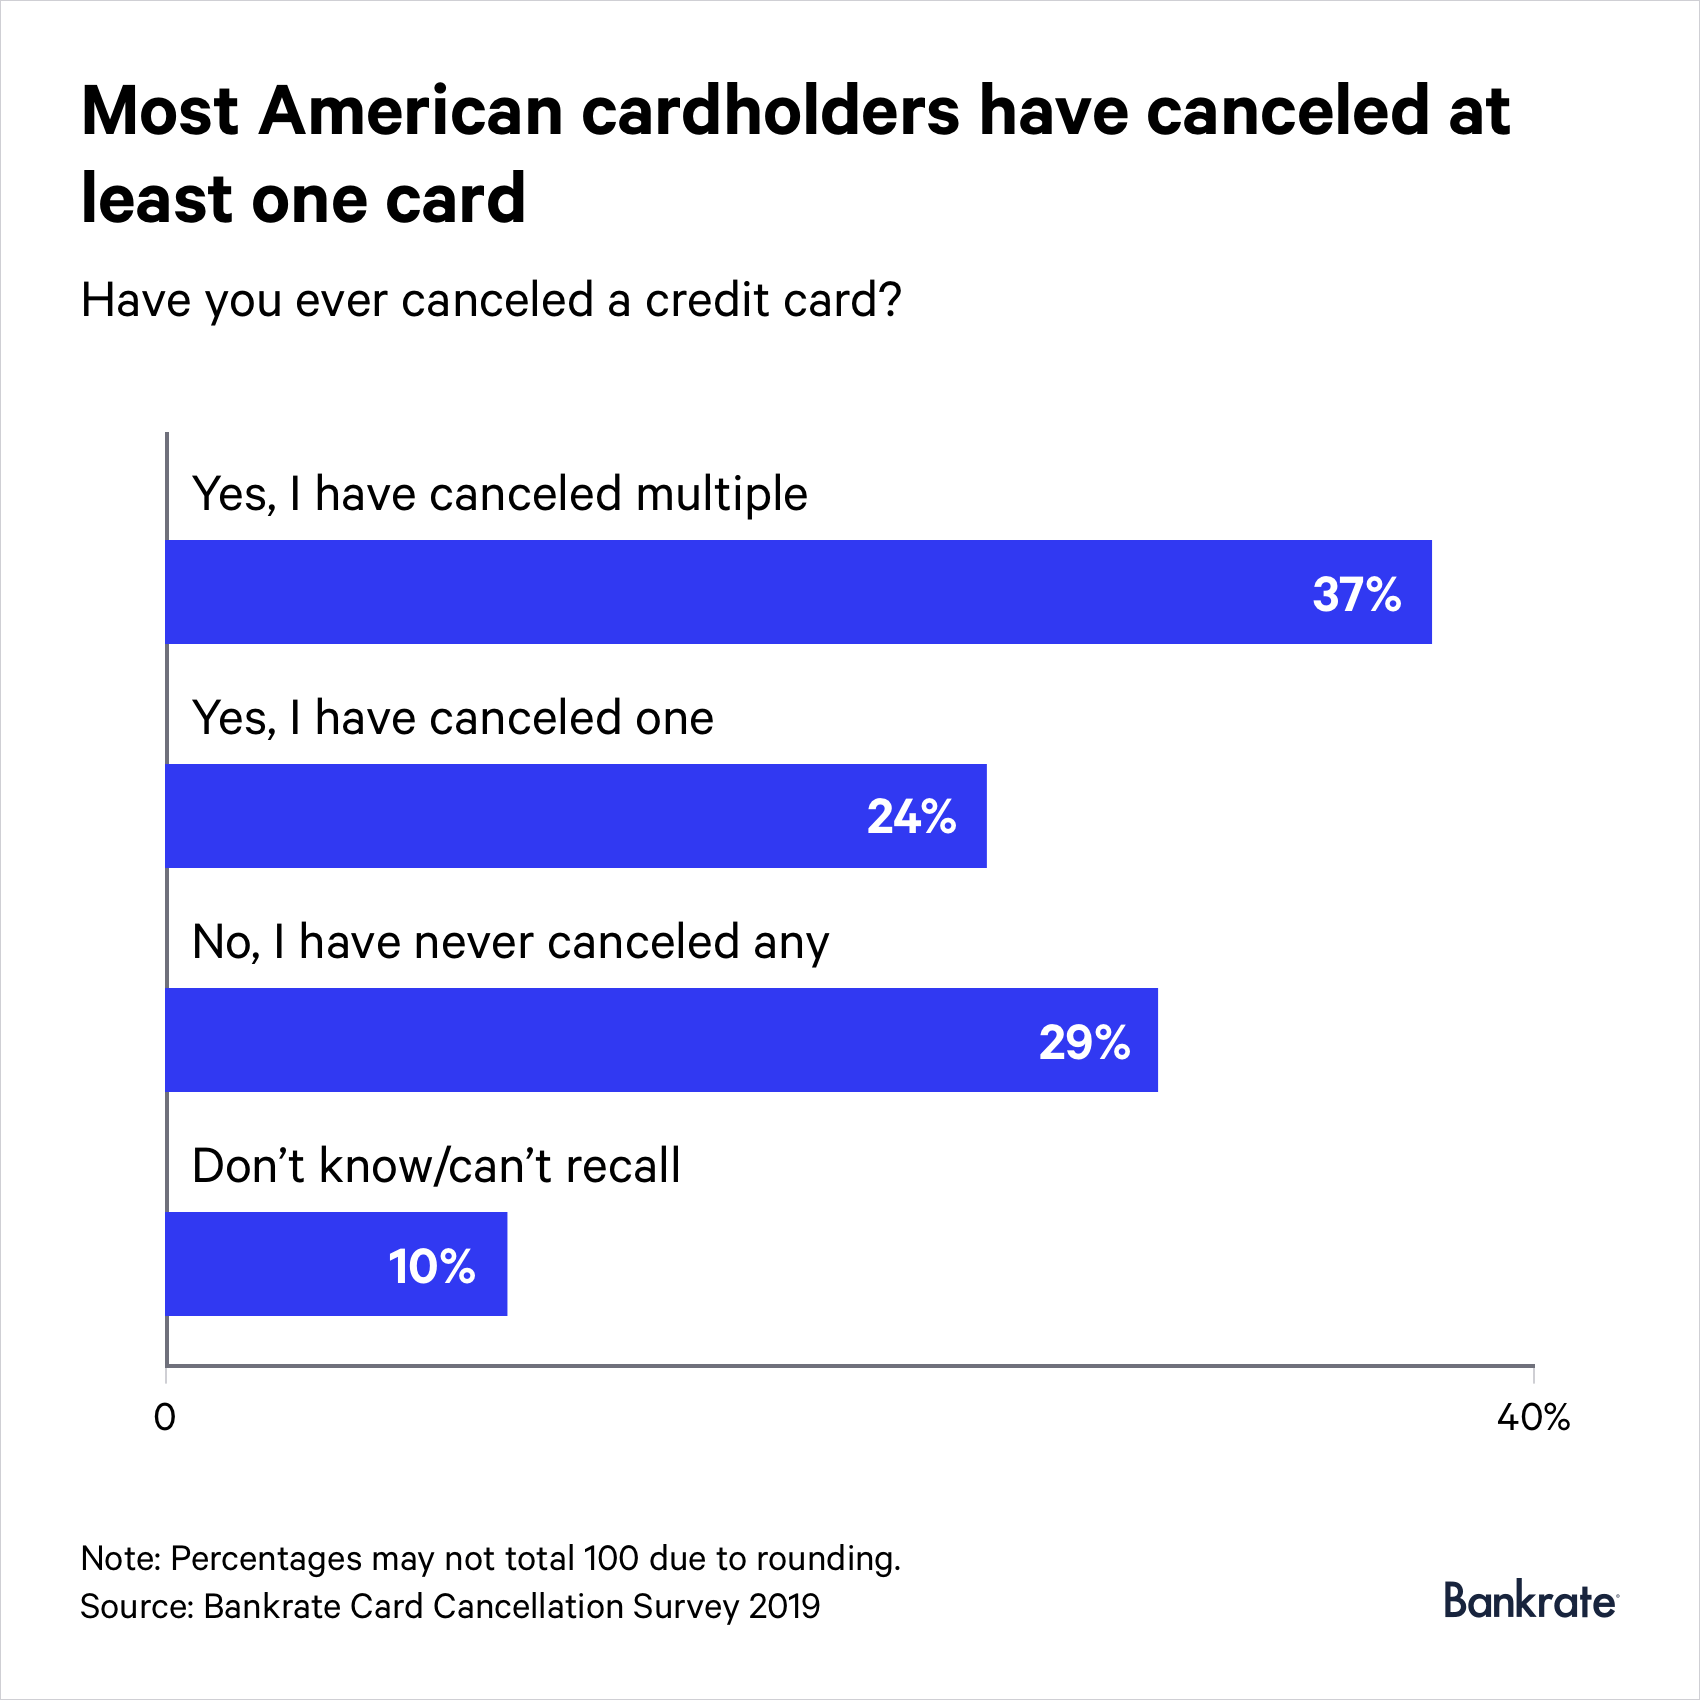 37% of respondents answered that they have canceled multiple cards